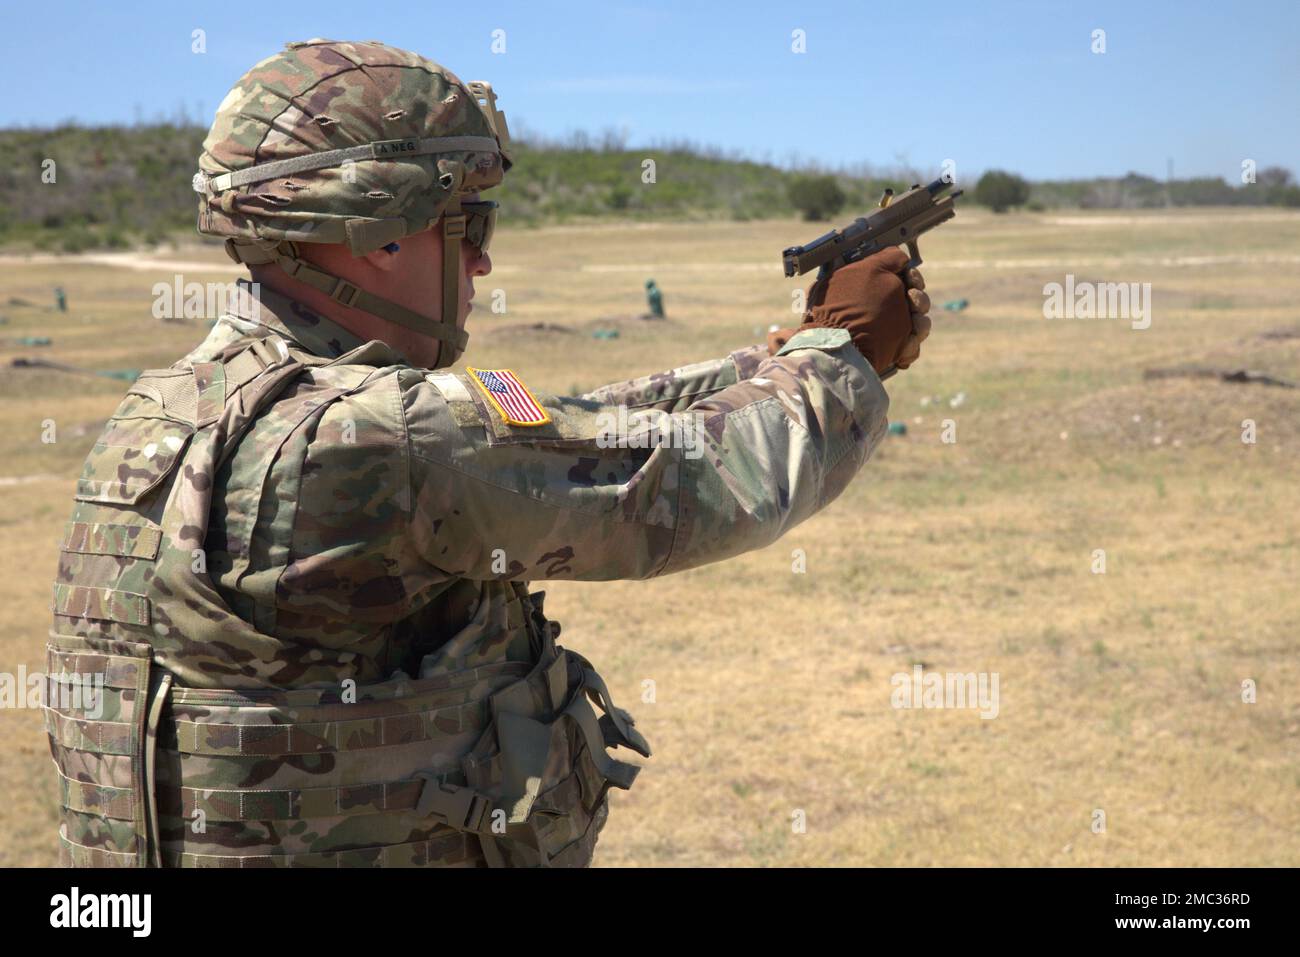 Spc. Martin Hestrin, an Army multichannel transmission systems operator-maintainer assigned to the 11th Corps Signal Brigade, takes a qualification test with an M17 pistol during the III Armored Corps Best Squad Competition 2022 on Fort Hood, Texas, June 24, 2022. The III Armored Corps pulled their most eligible squads from its divisions and separate brigades to compete in this year’s inaugural competition. The winning squad will go on to compete at the U.S. Army Forces Command competition in August on Fort Hood. Stock Photo